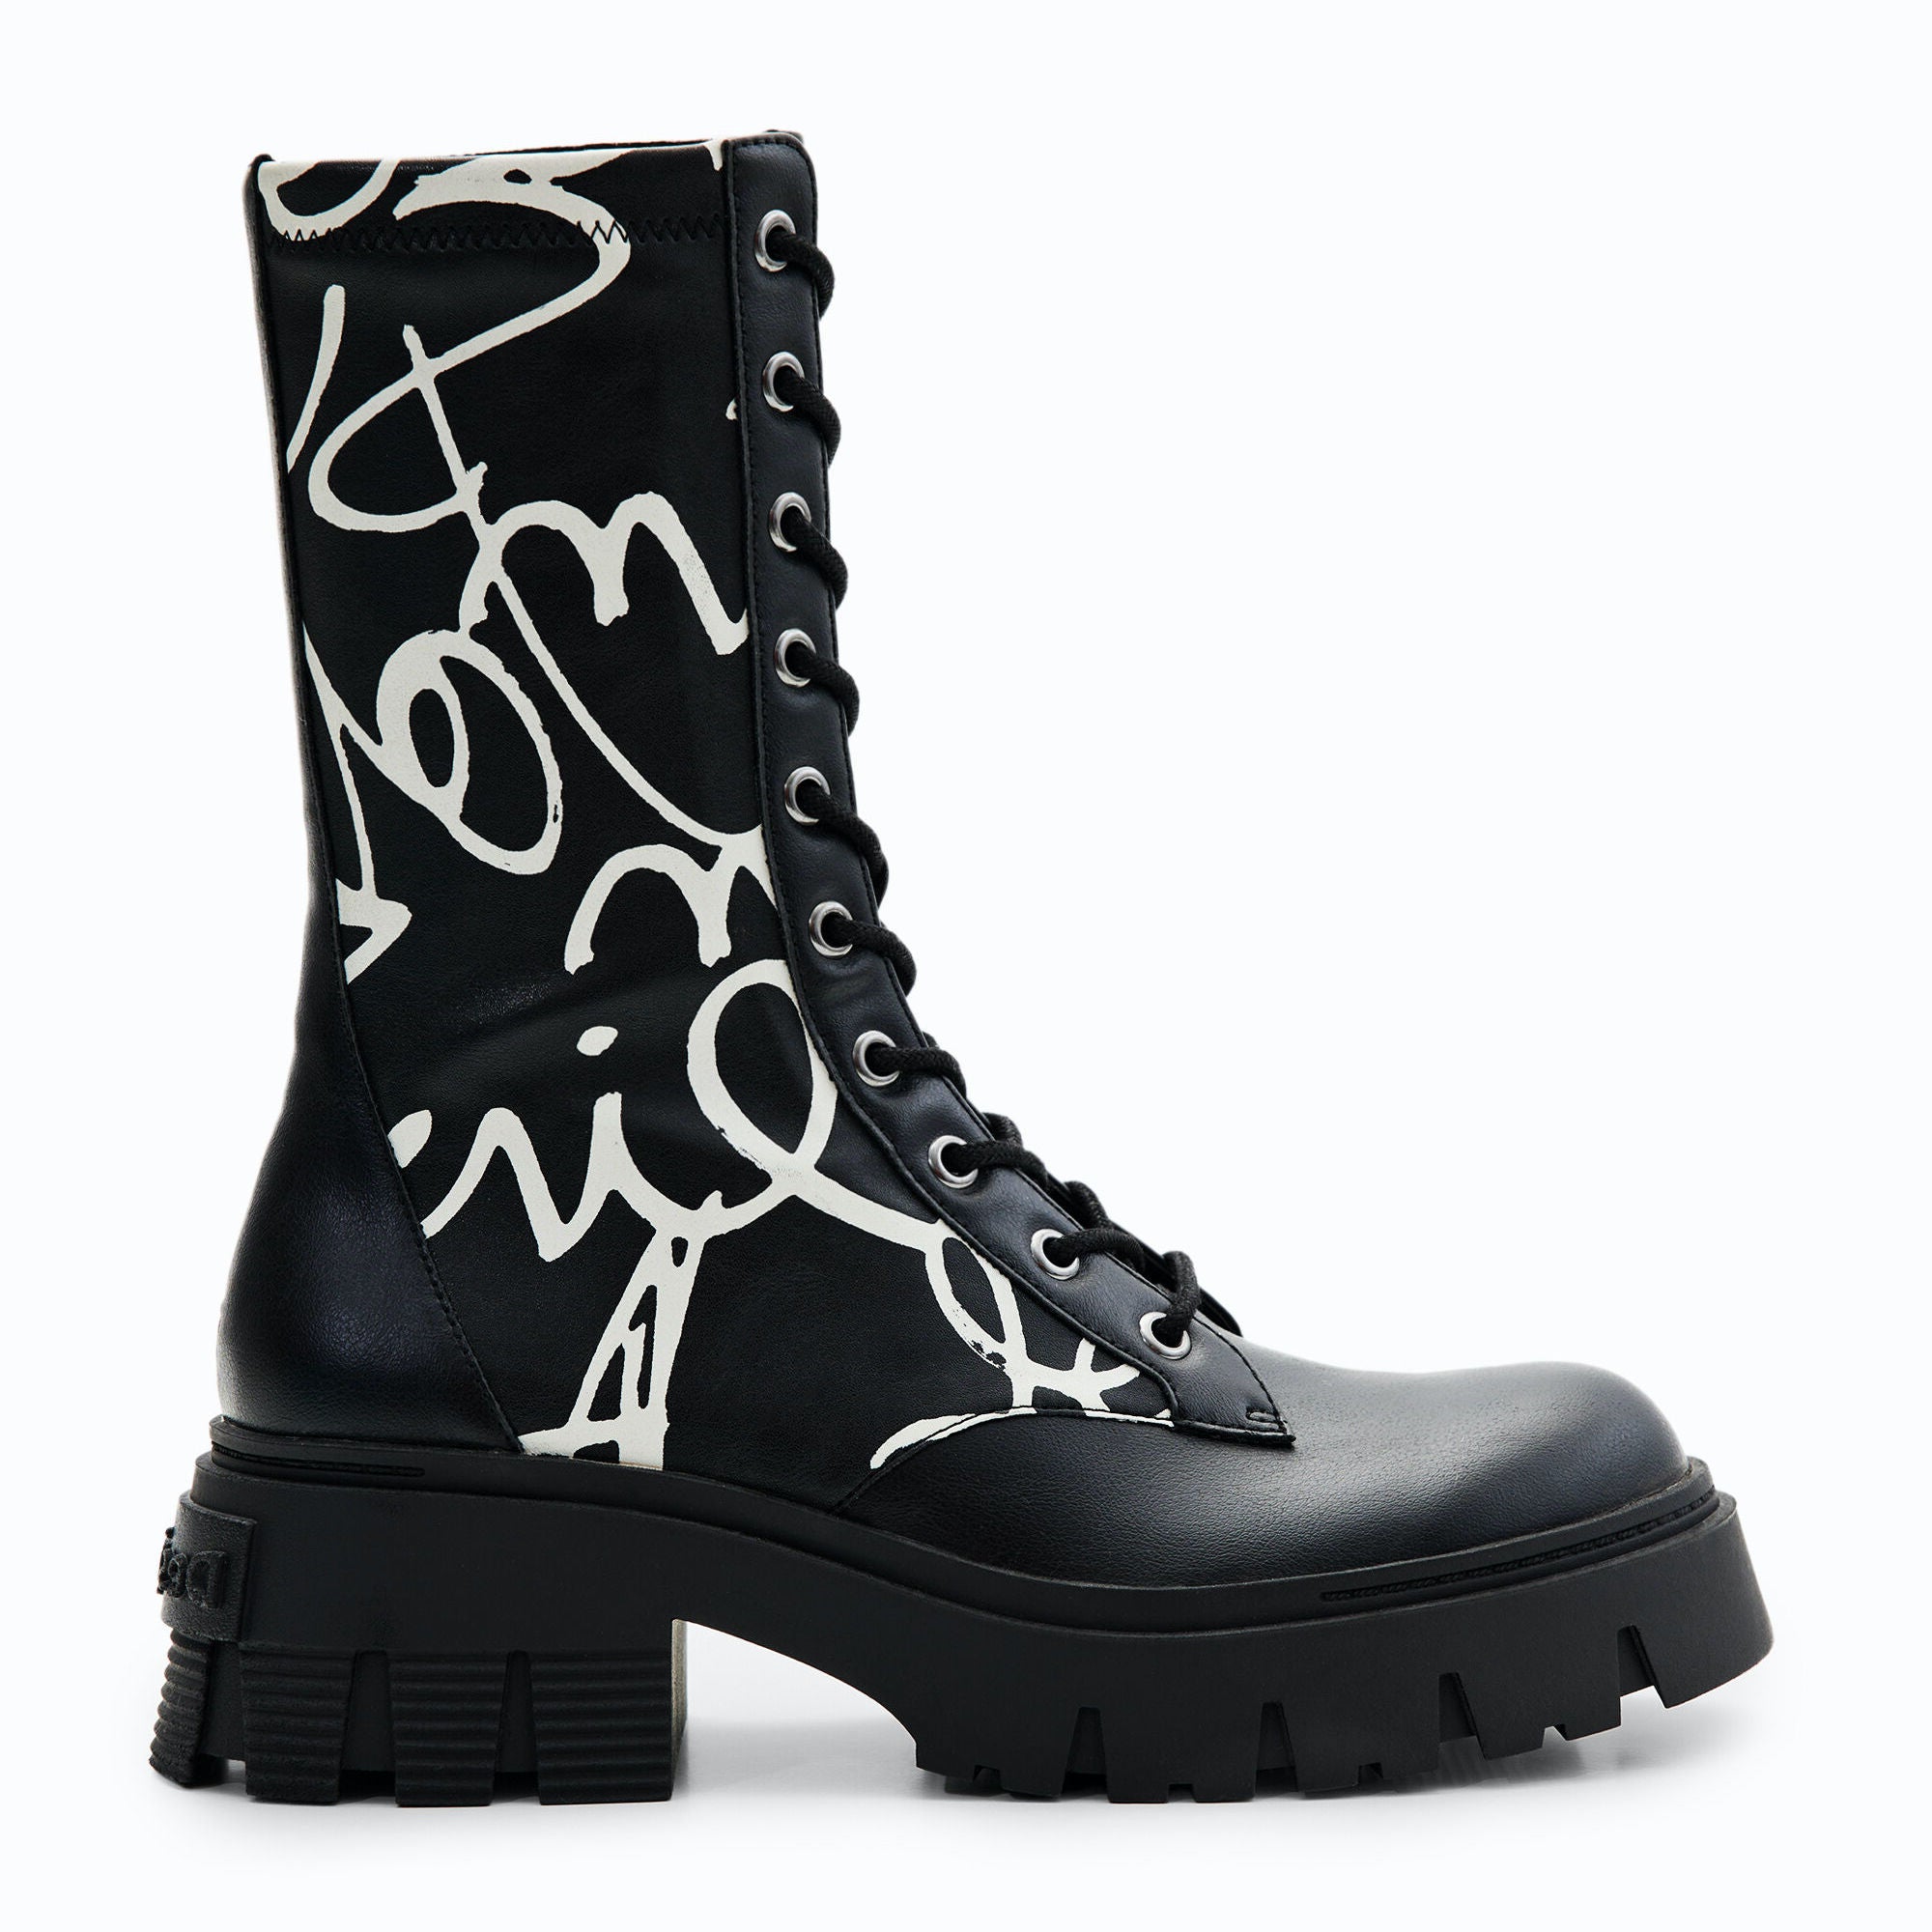 Outer side view of the desigual message boot